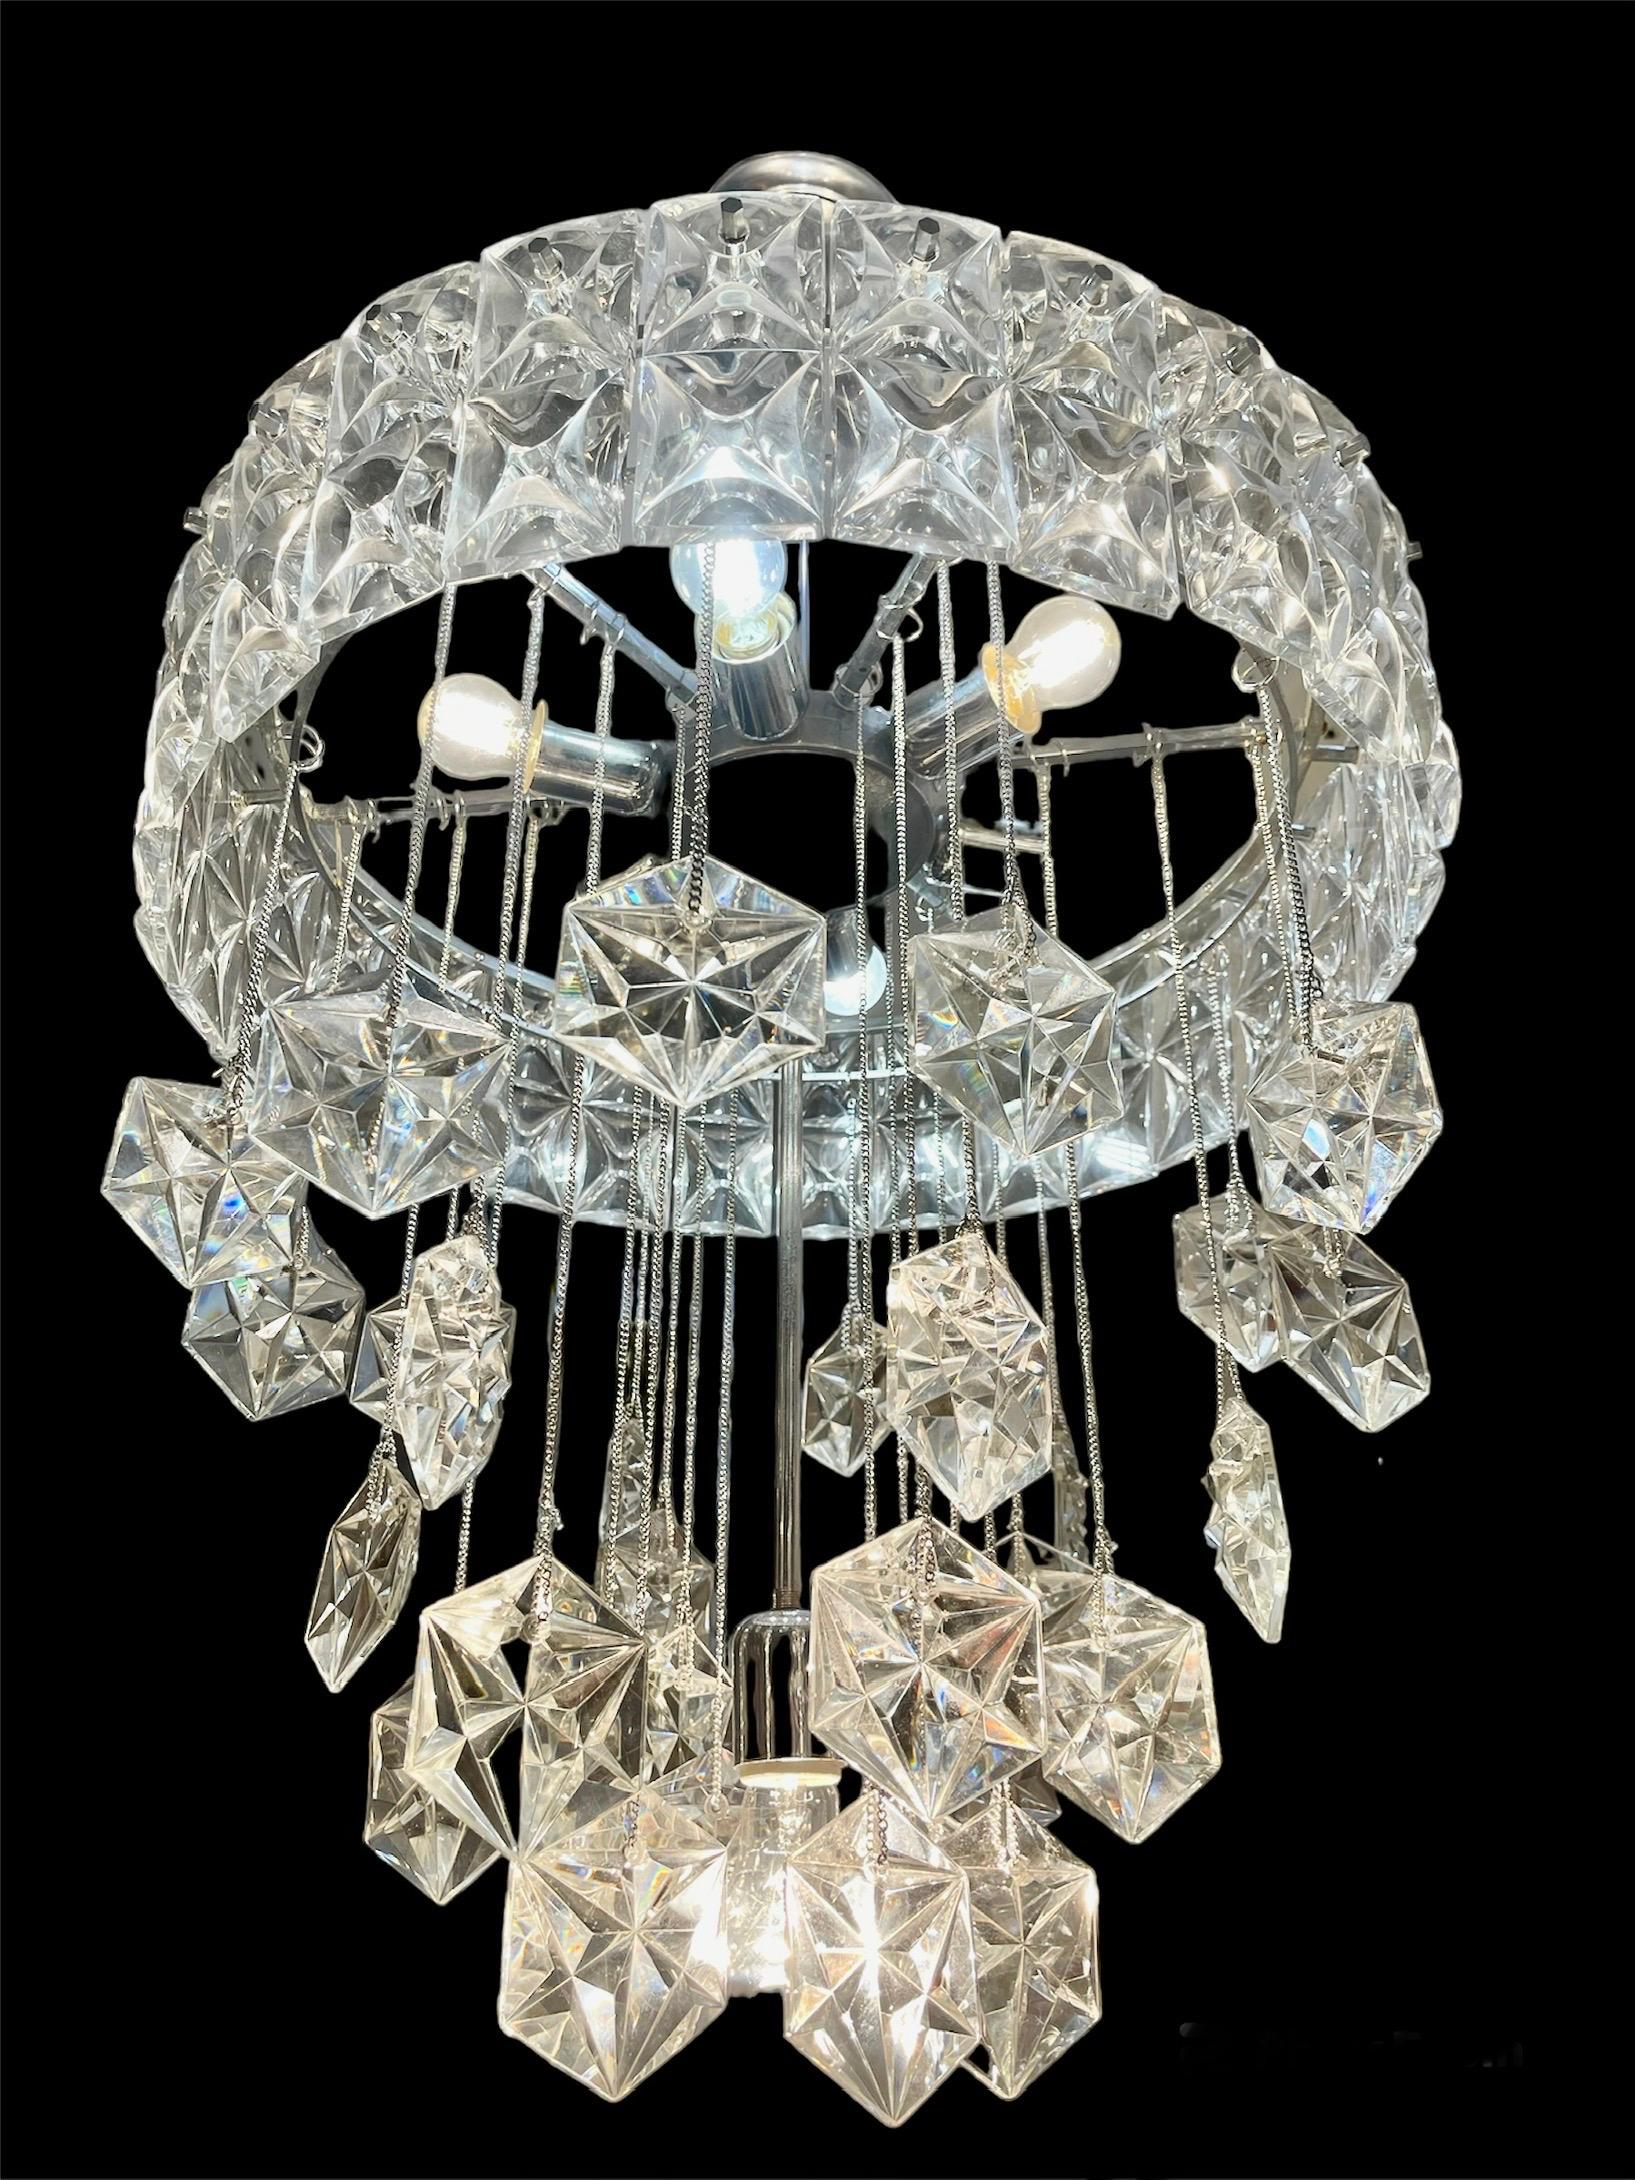 Exceptional JT Kalmar chandelier with large ice frost glass Flakes with brass / chrome structure. The Design and the quality of the glass make this piece the best of the Austrian Design.

This unique Kalmar chandelier in cristal glass are